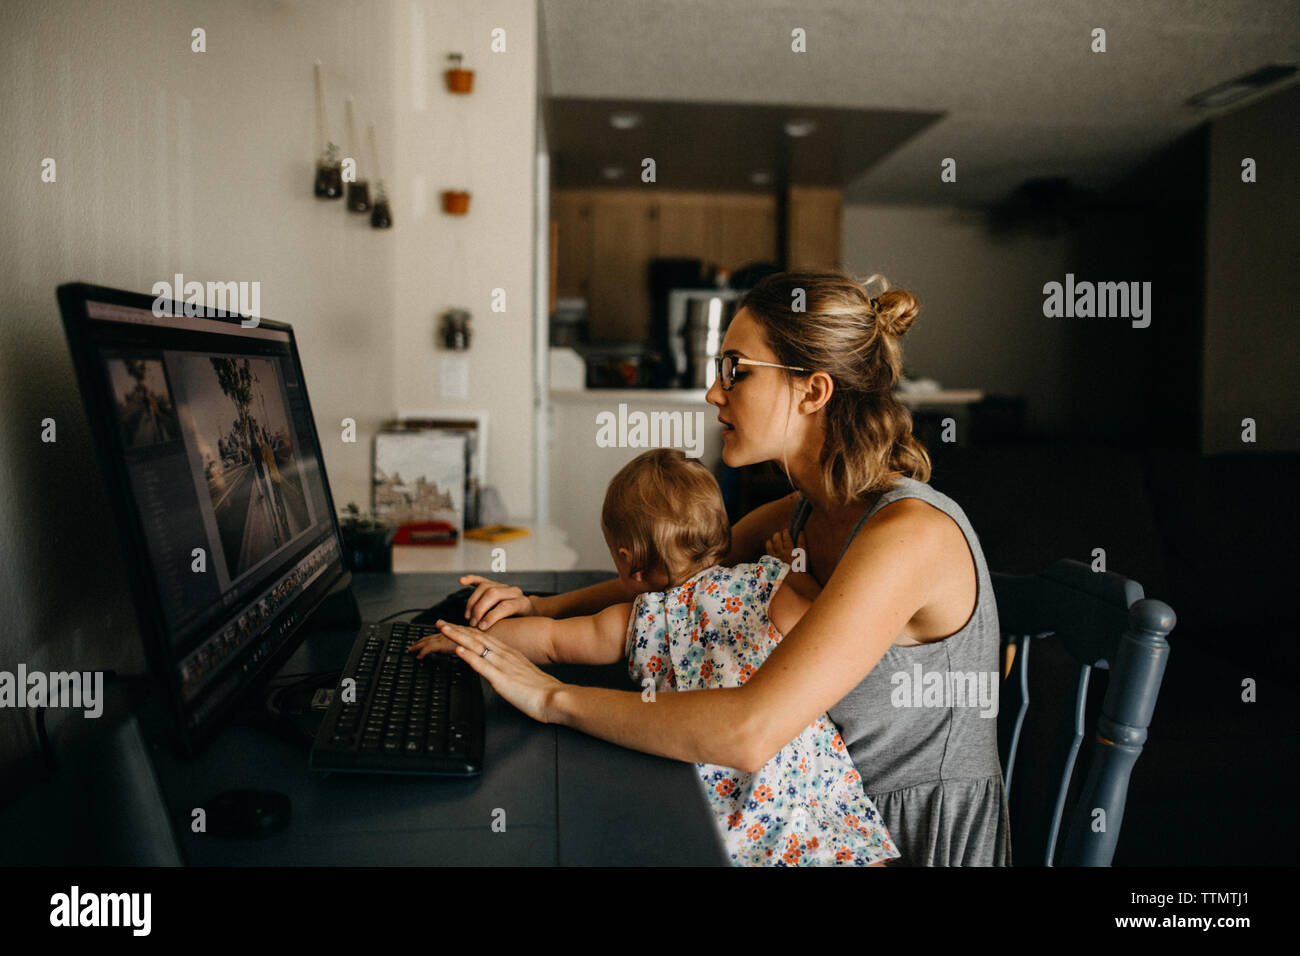 Multitasking working mother holding baby and typing on computer Stock Photo